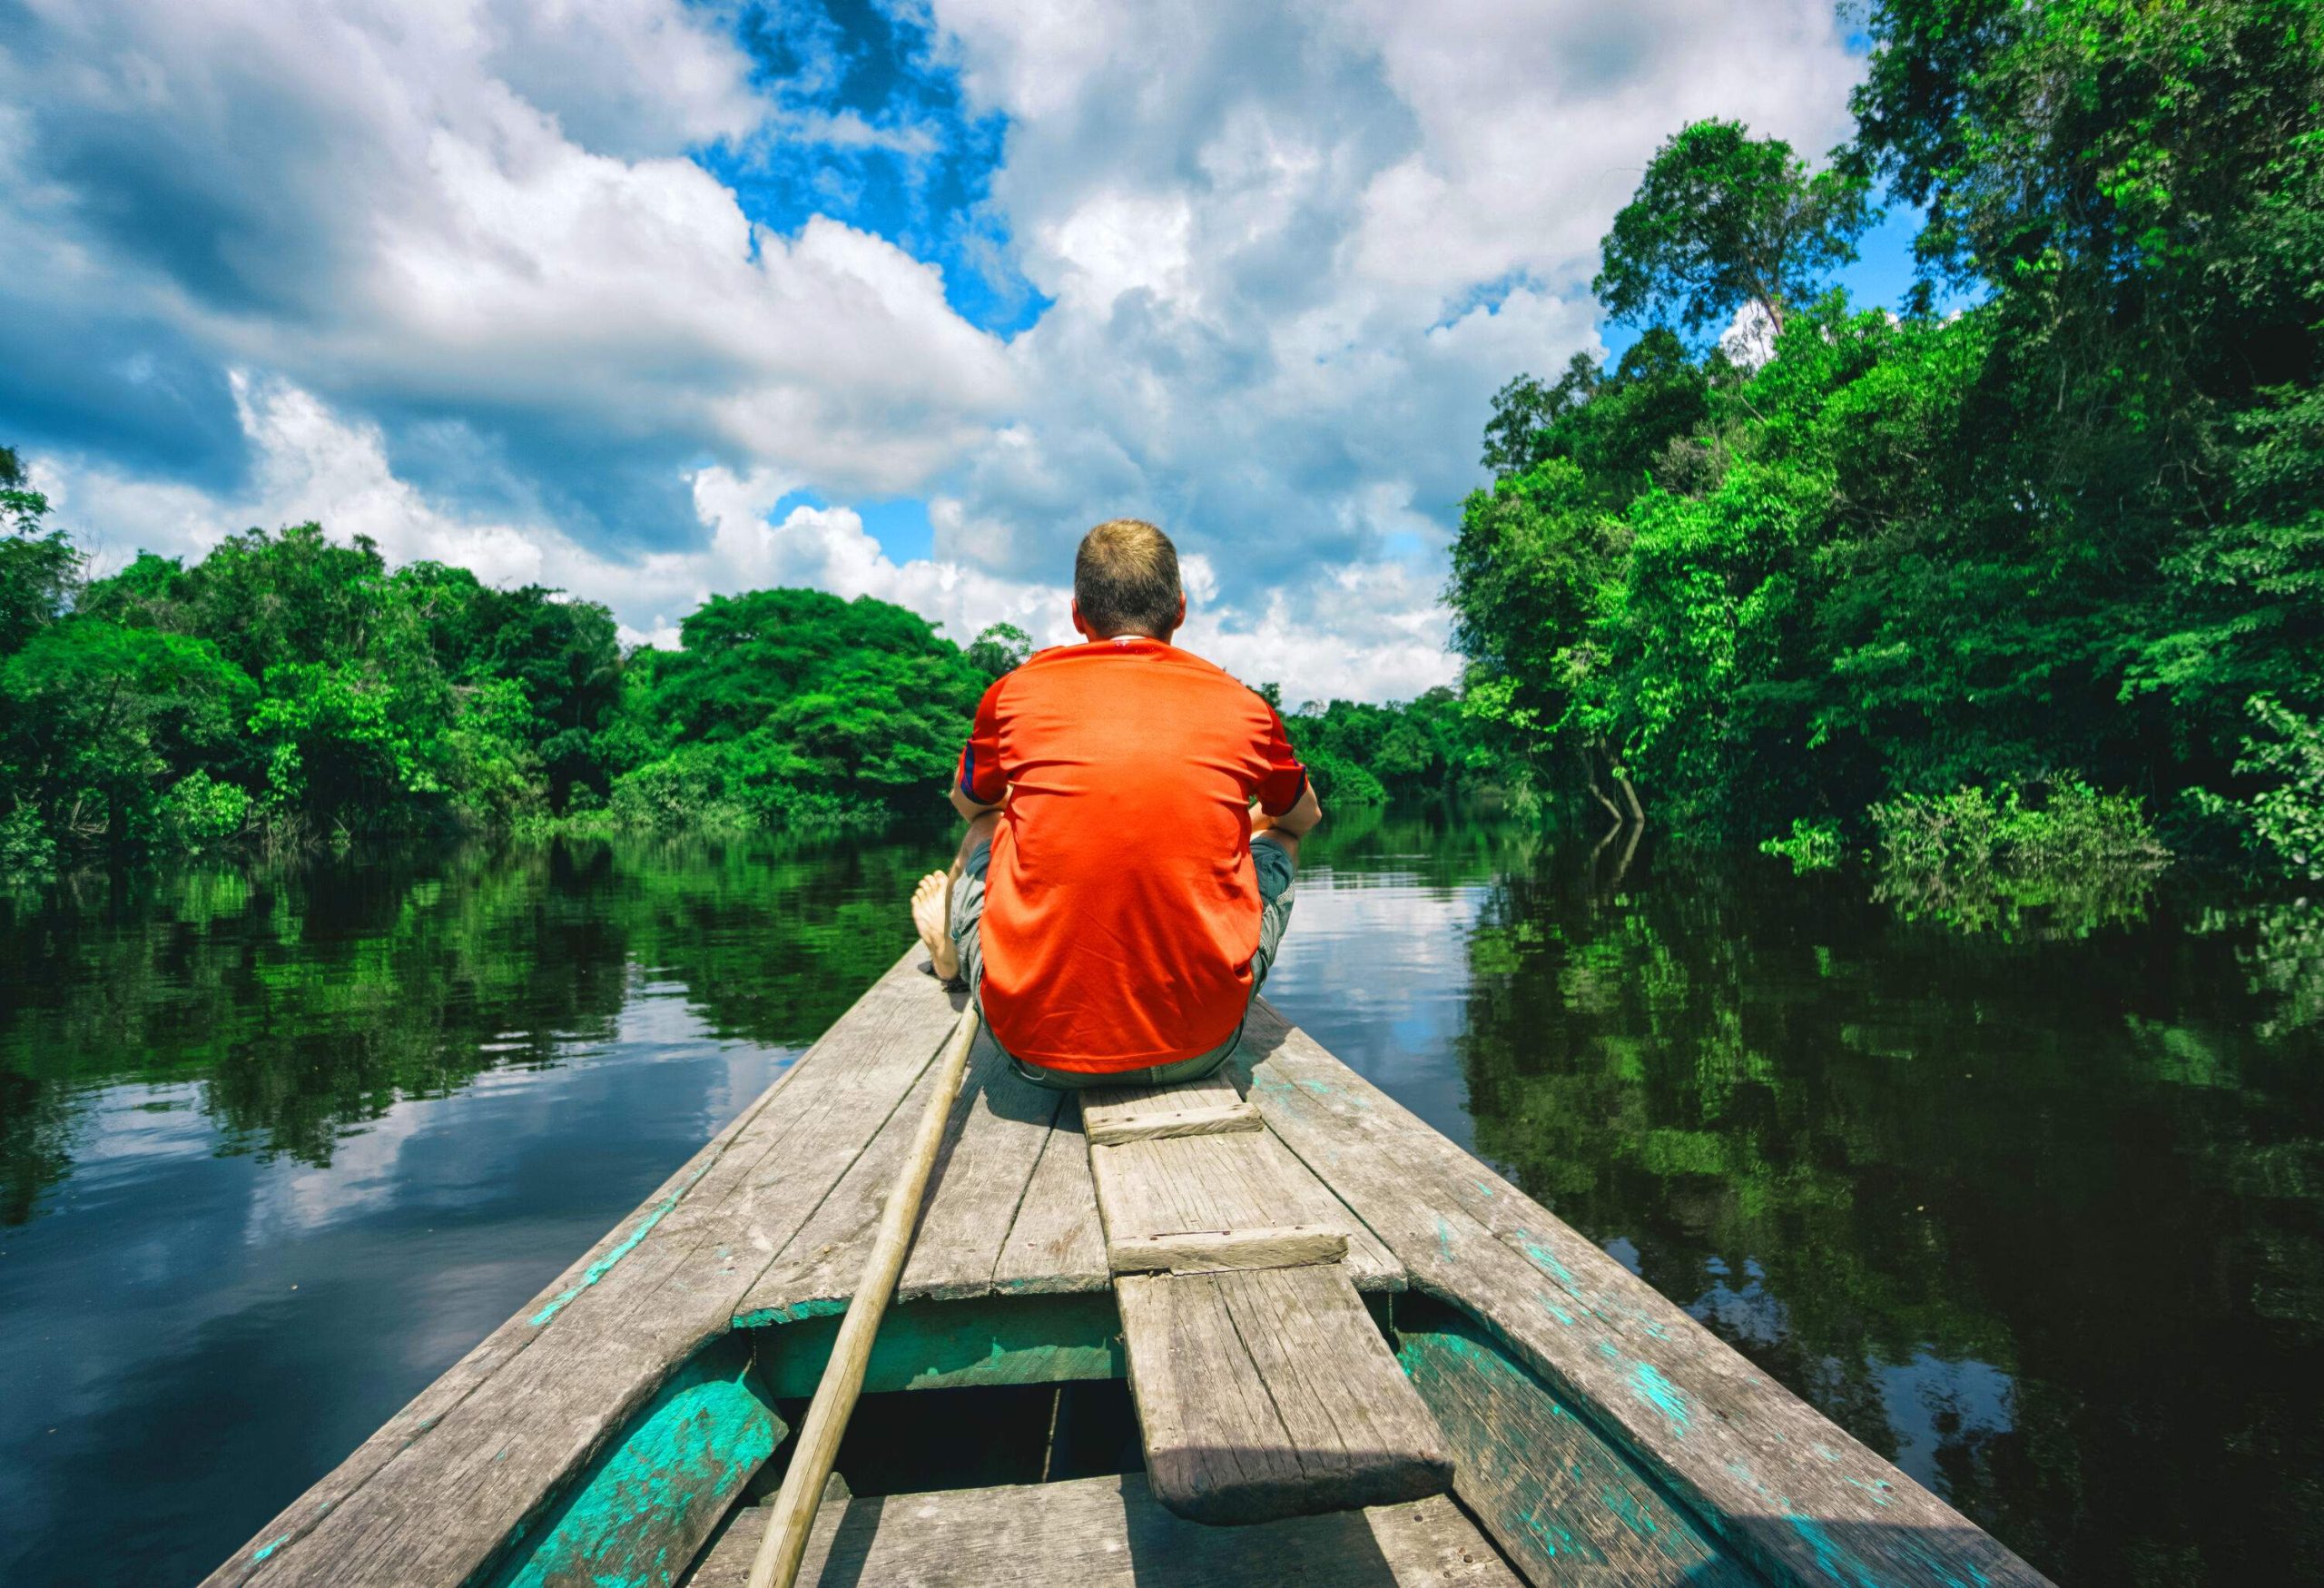 A man wearing an orange t-shirt sits at the bow of a wooden boat on a river surrounded by verdant trees against the cloudy blue sky.